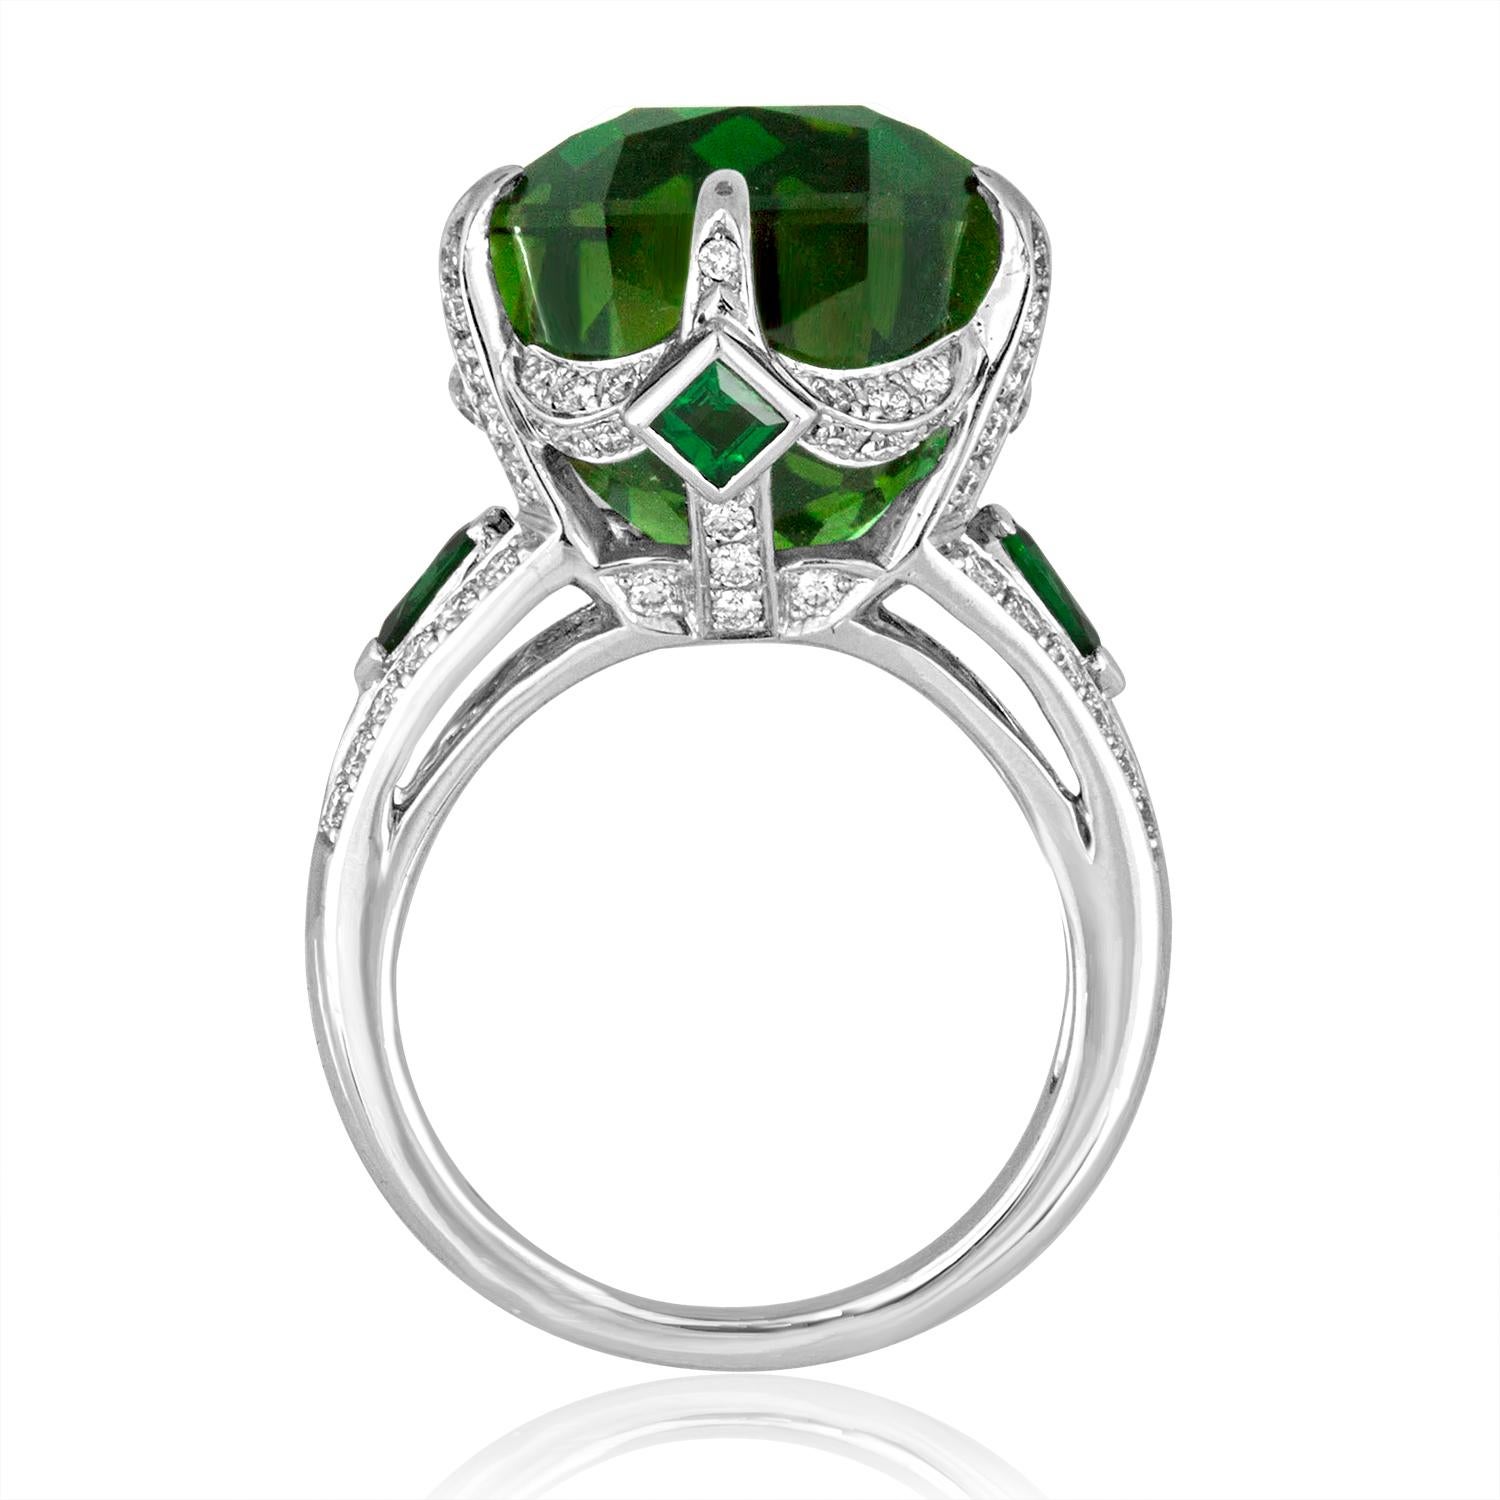 One-Of-A-Kind Ring
The ring is 18K White Gold
The center stone is a 19.00 Carat Tourmaline
Accented by 0.60 Carats of Tsavorite
Surrounded by 0.92 Carats in Diamonds G/H SI.
The ring is a size 6.25, sizable.
The ring weighs 11.3 grams
The ring comes